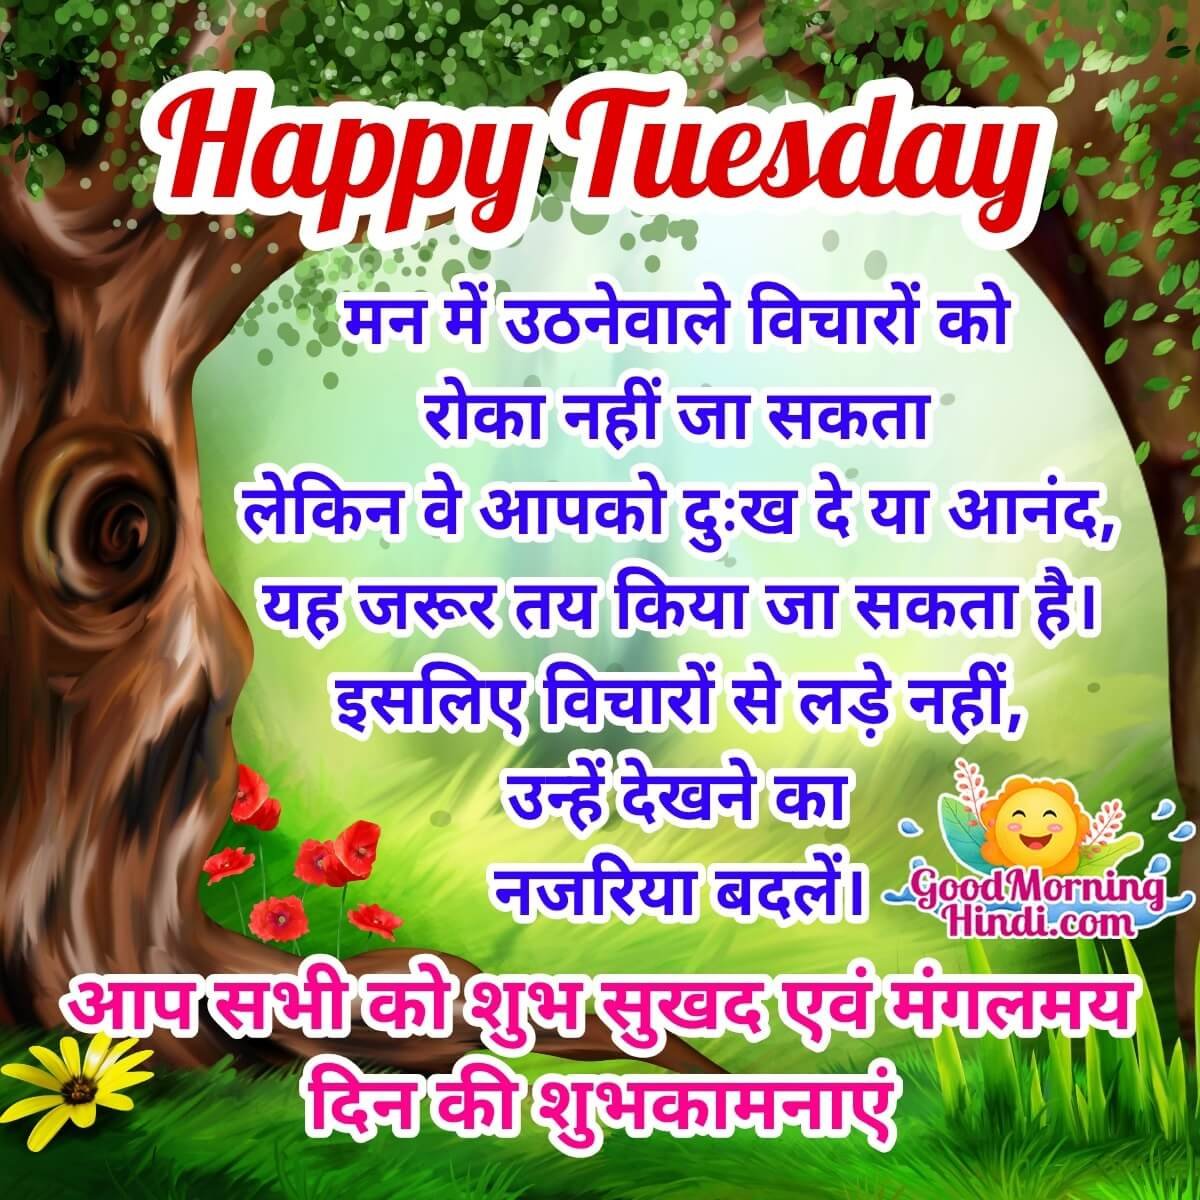 Tuesday - Good Morning Wishes & Images In Hindi